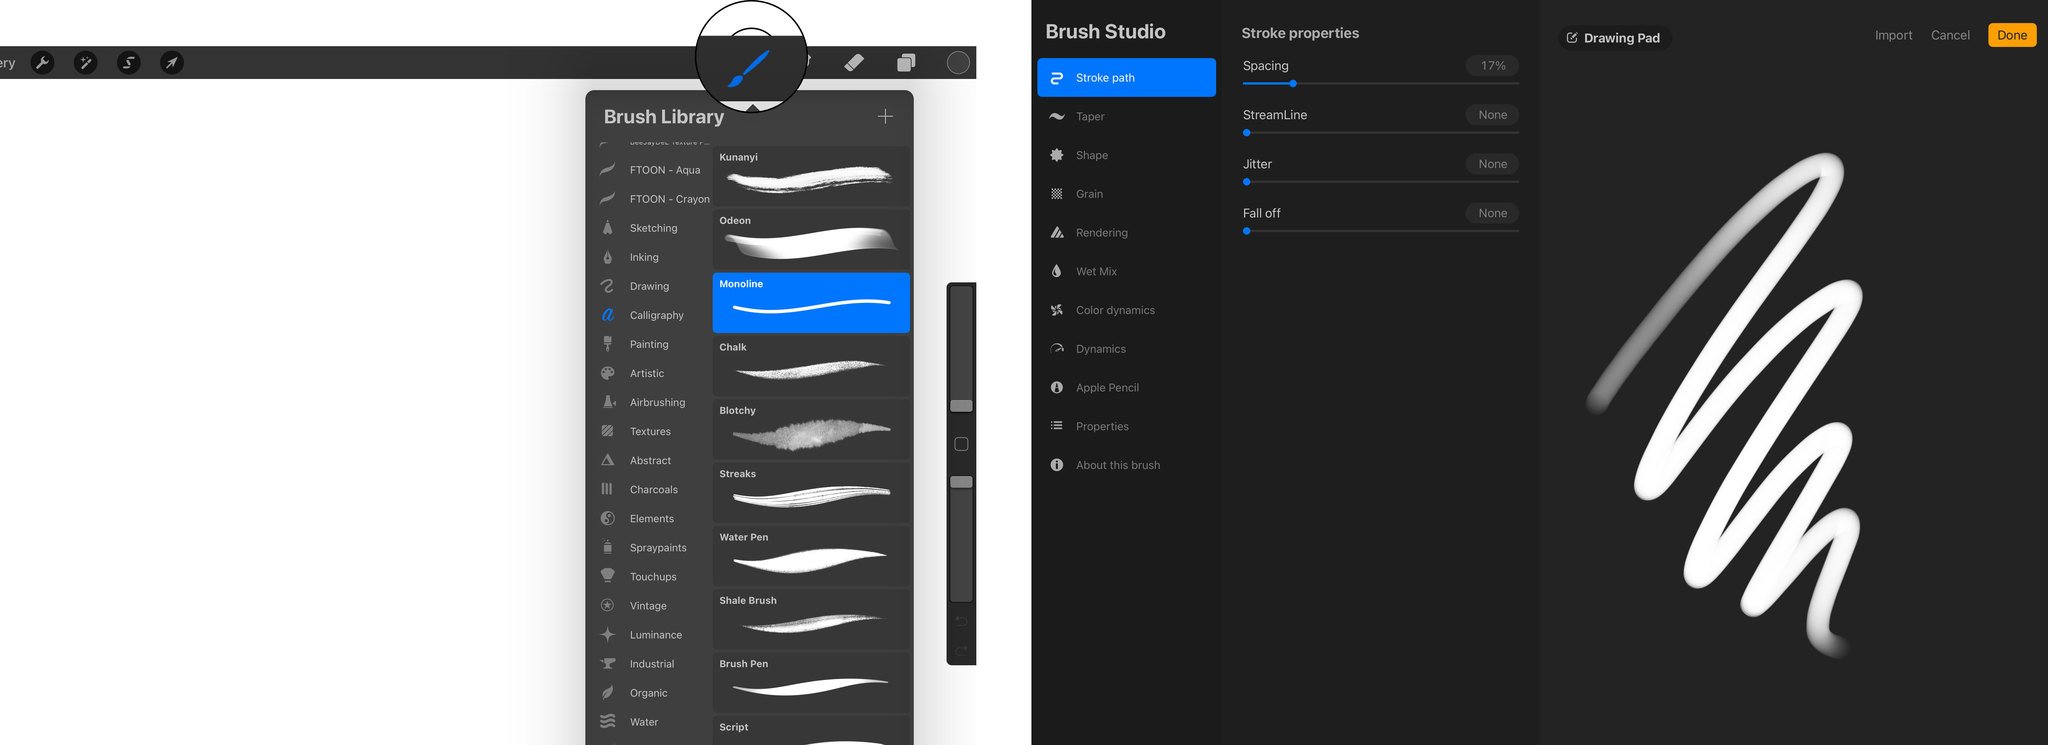 To select or edit a Brush, tap on the Brush icon button to open the Brush Library, select a Brush from one of the Categories, tap on the Brush to open the Brush Studio to view all of the available options to edit the Brush.